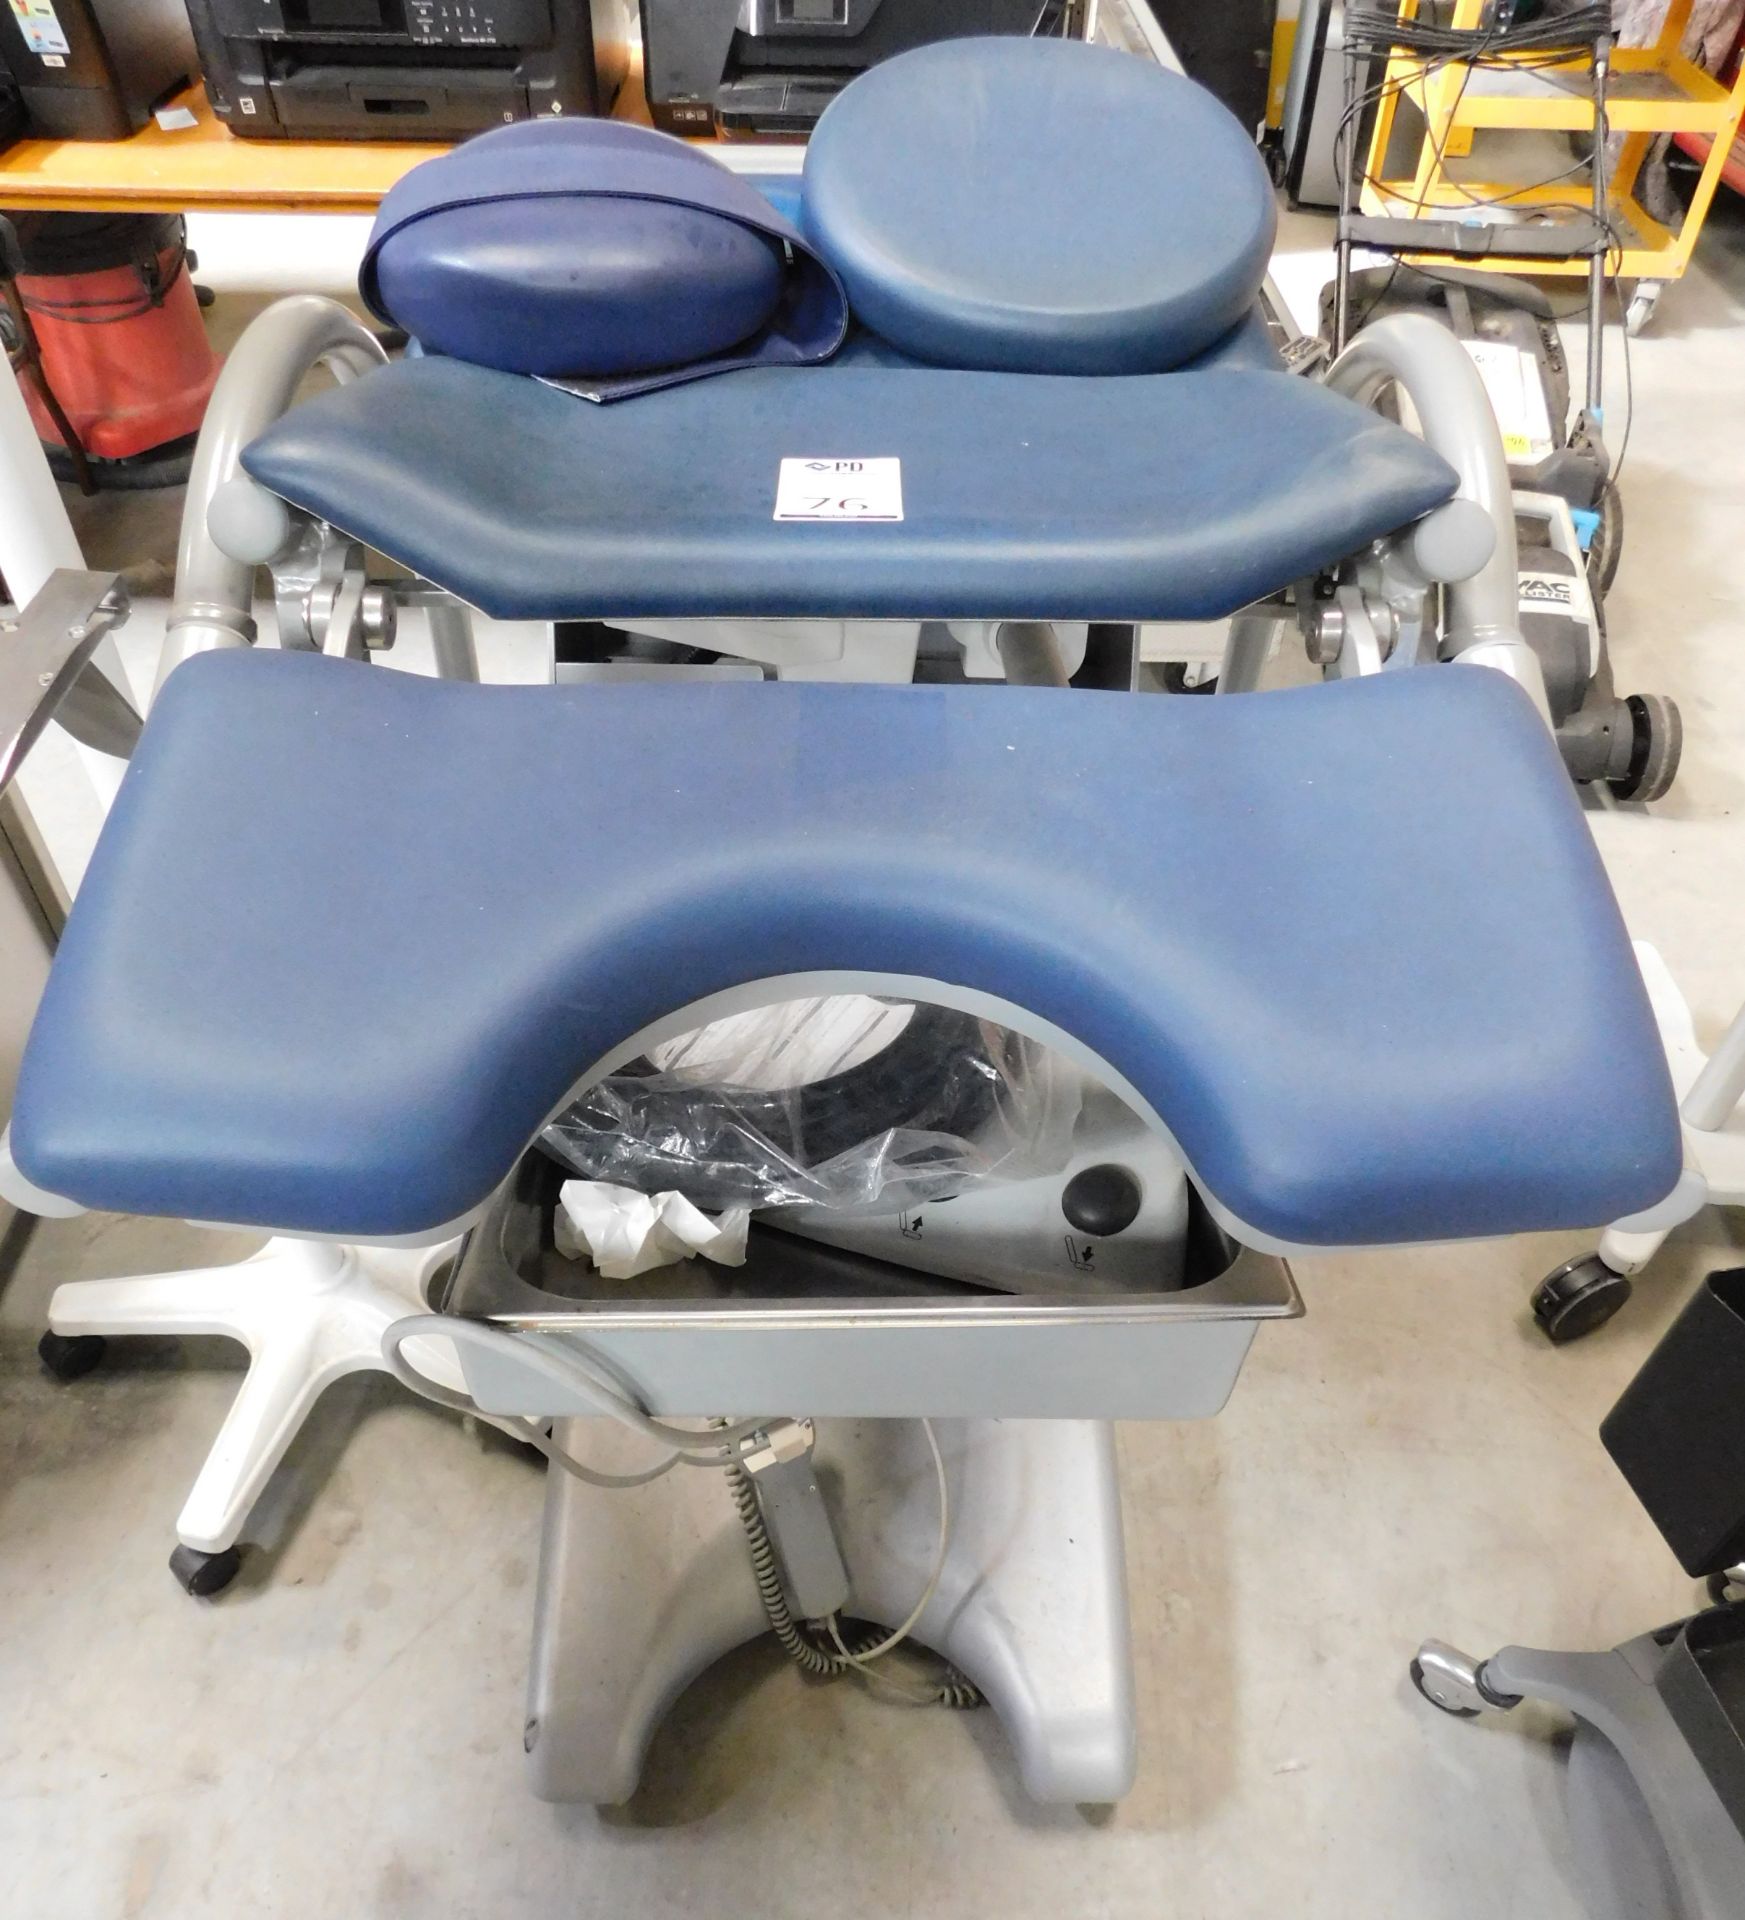 Schmitz 114.655 Gynaecological Treatment Chair, Serial Number 114655-095214-07-N (Location: